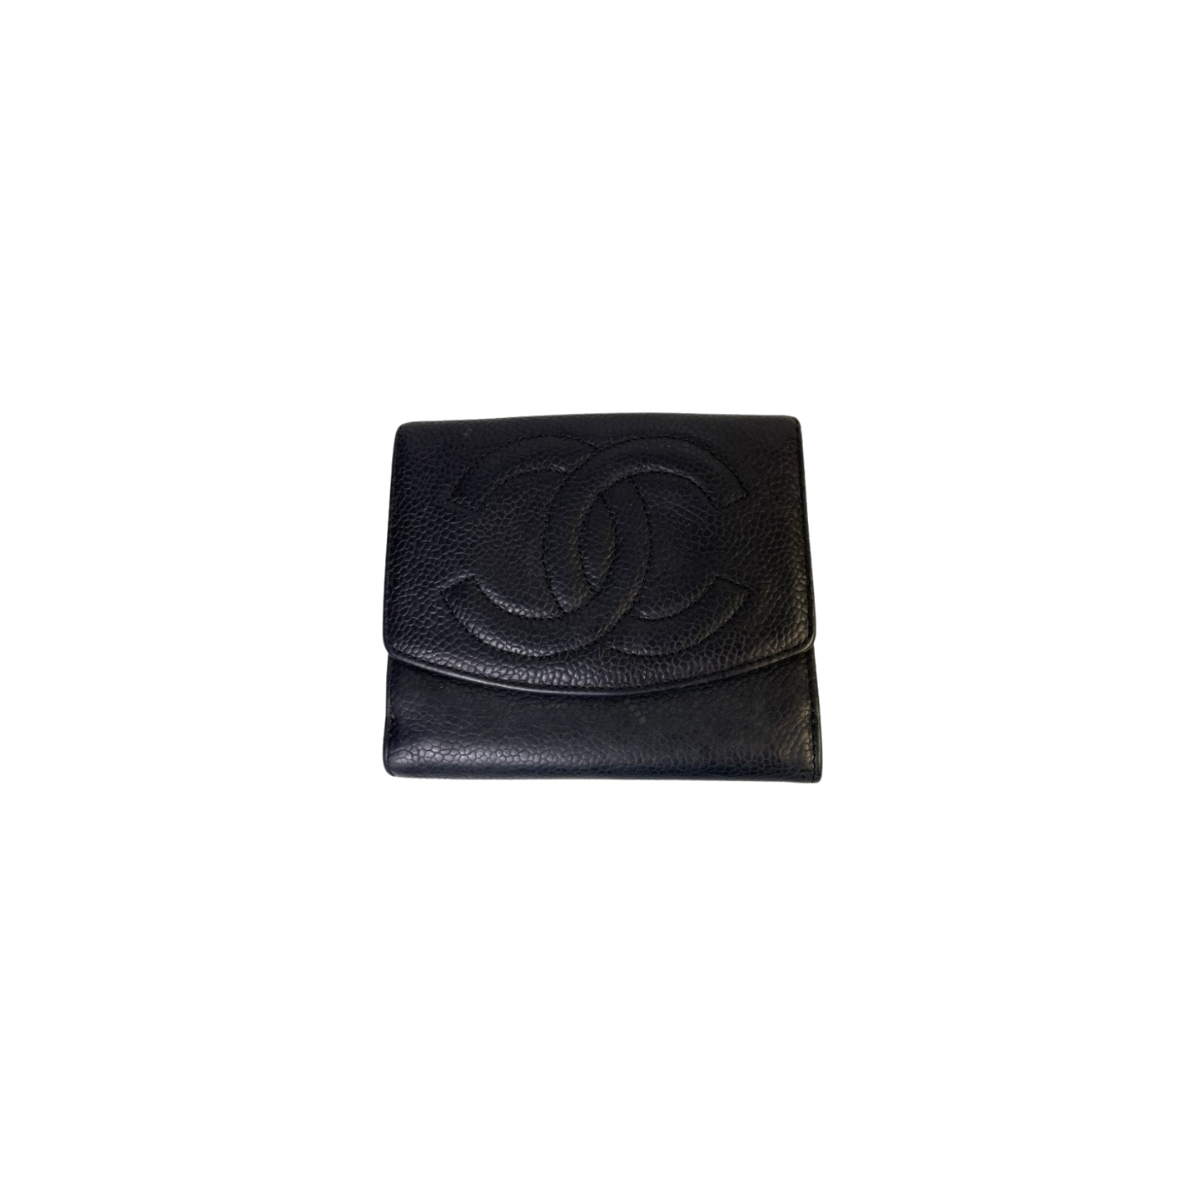 Authentic Chanel trifold wallet (color black) authenticity card